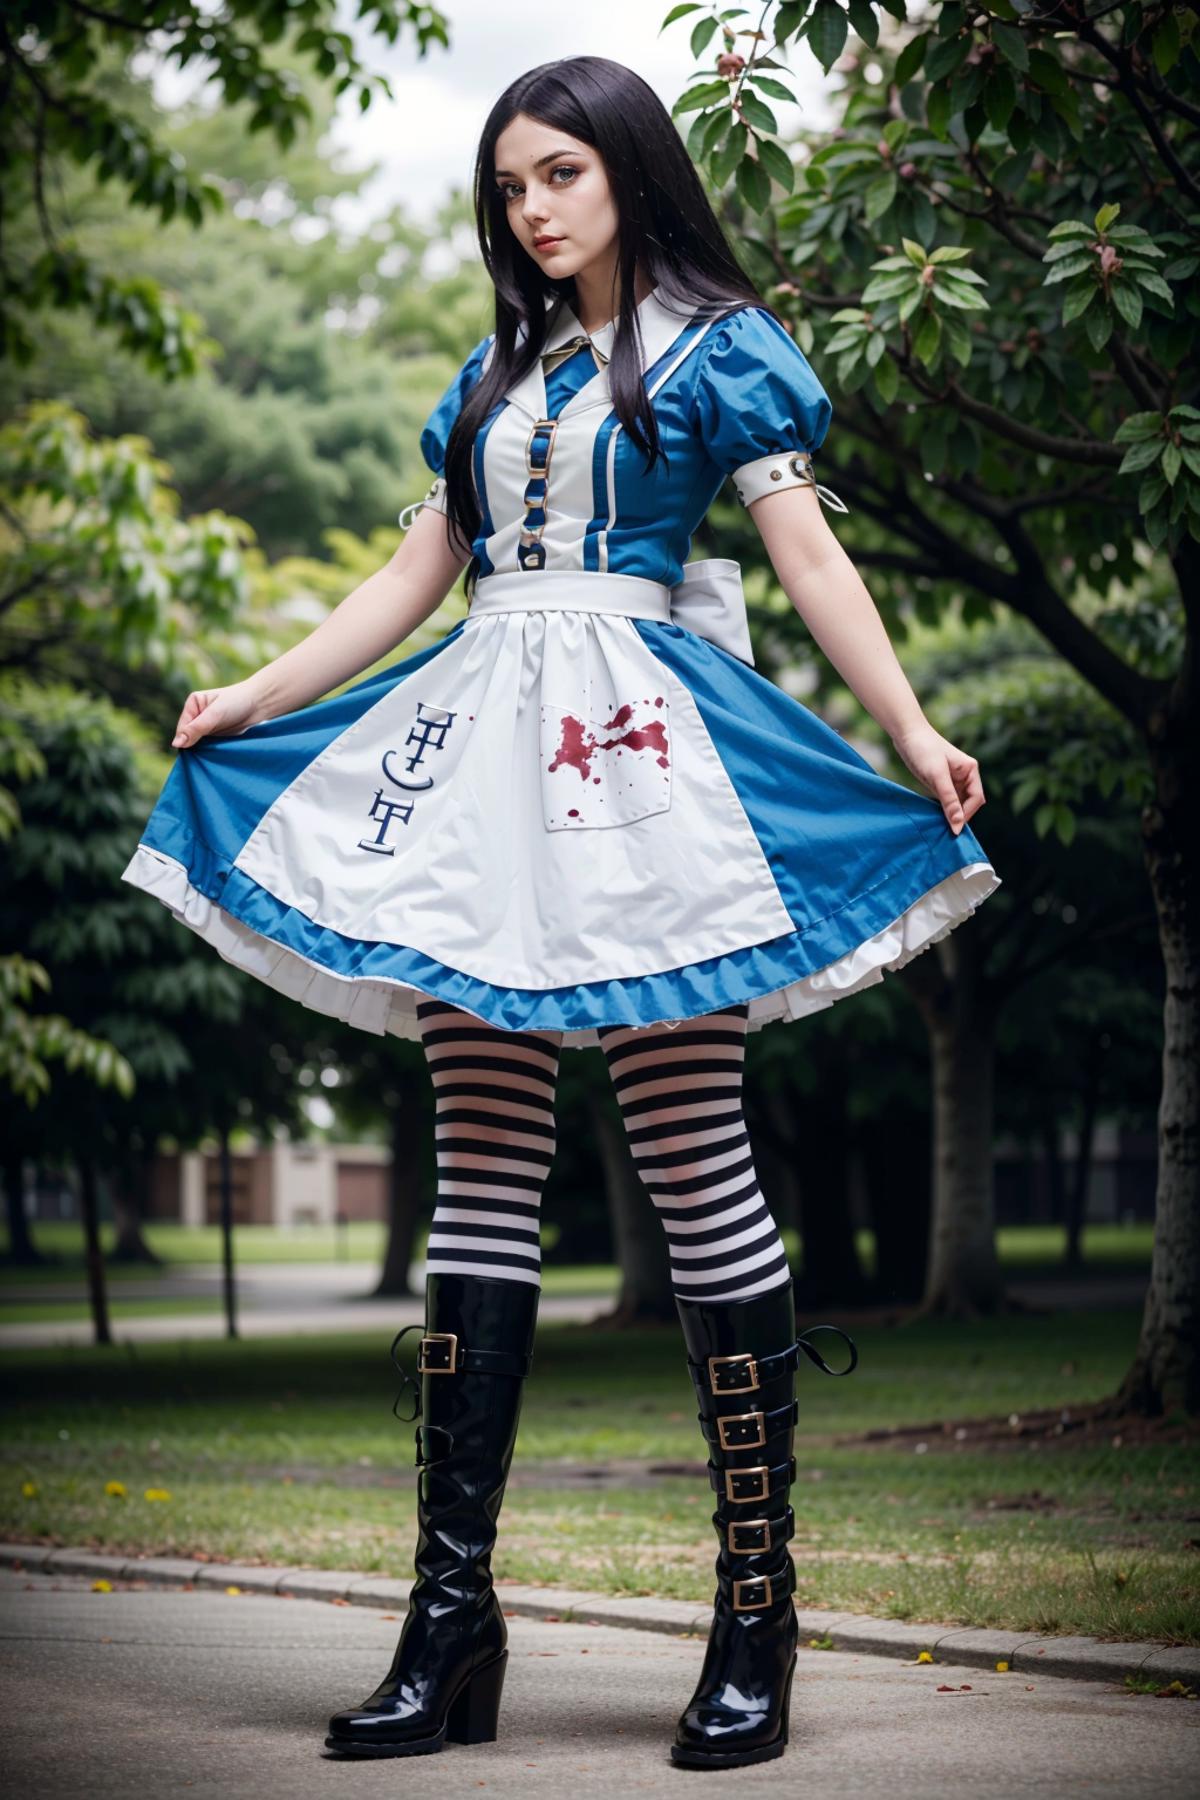 Alice from Alice: Madness Returns image by BloodRedKittie